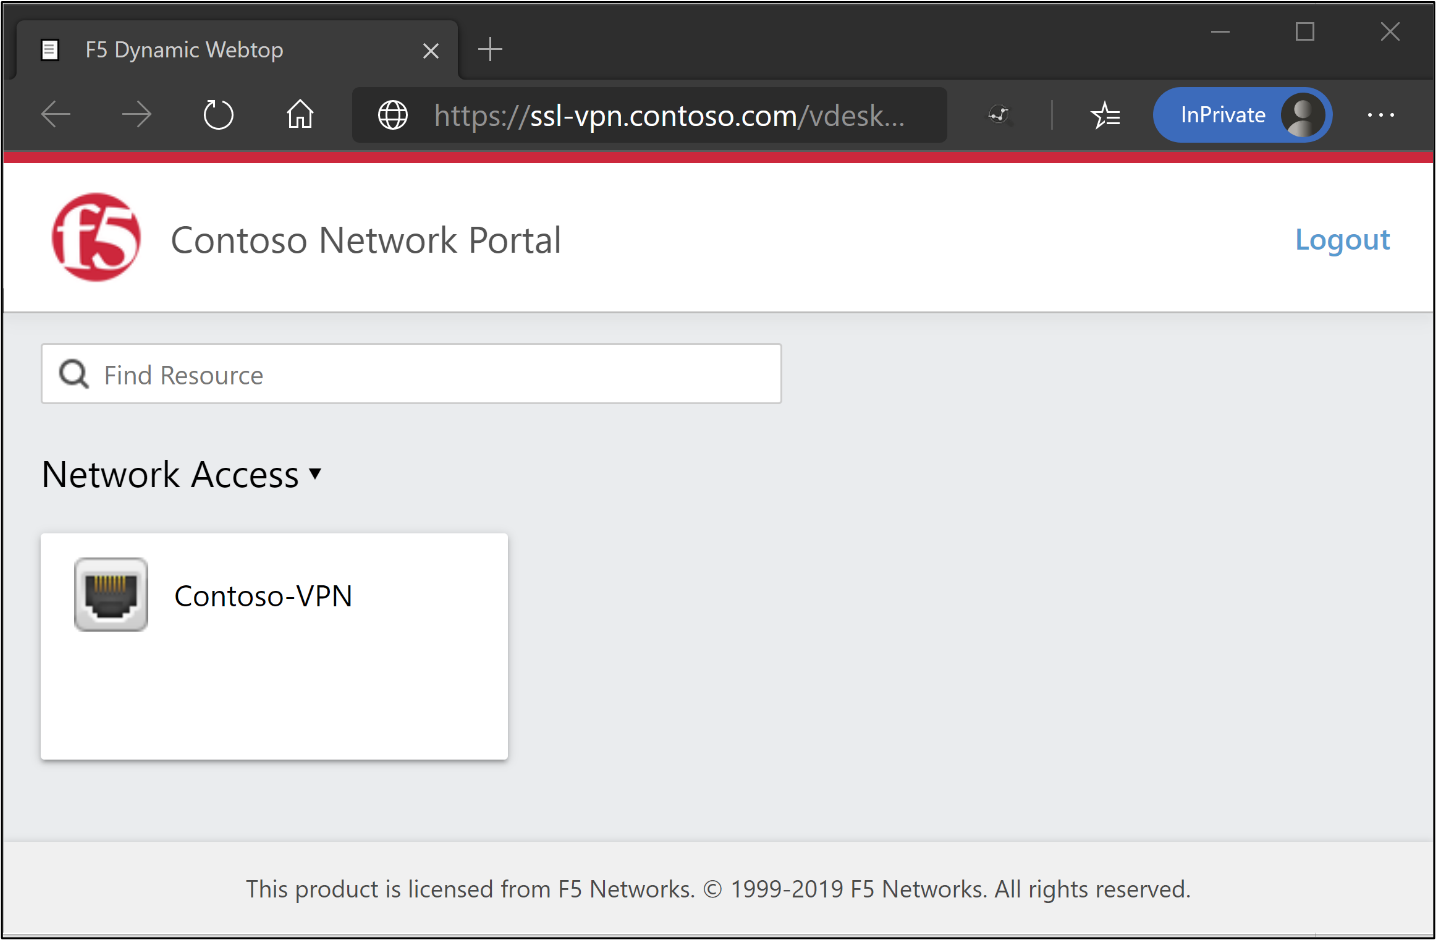 Screenshot of the Contoso Network Portal page with network access indicator.